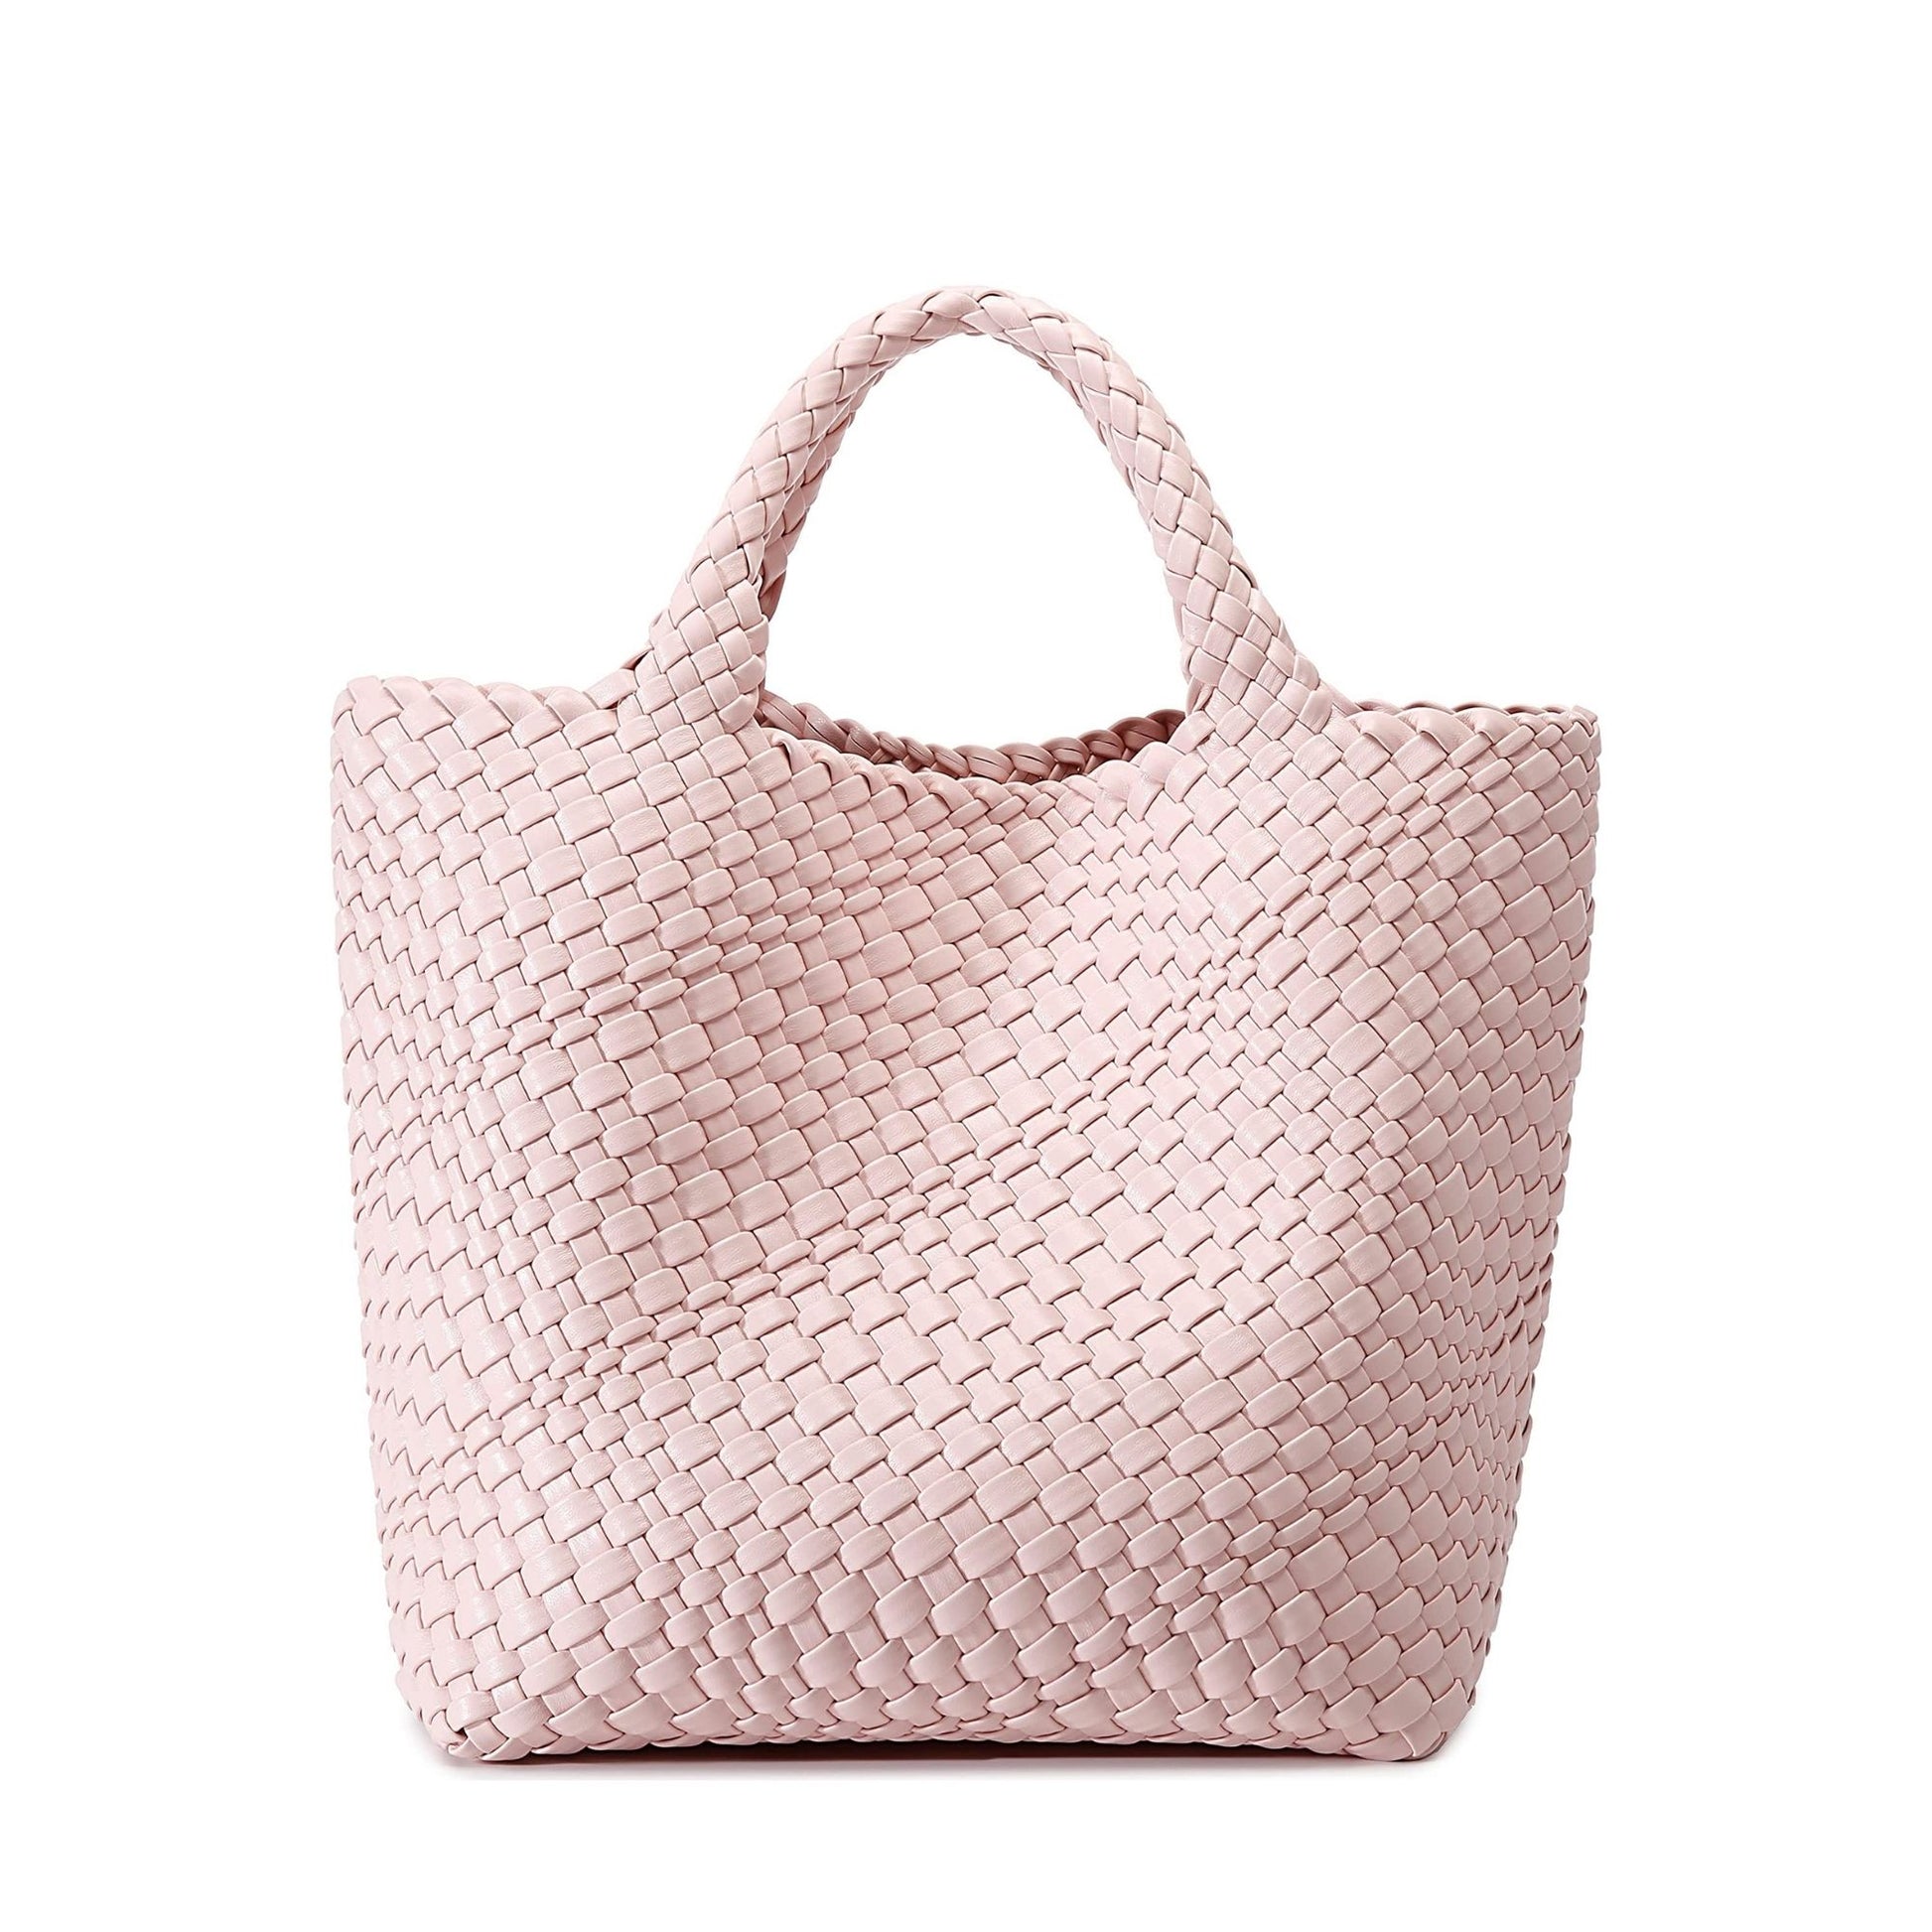 Woven vegan leather totes are this summer's undisputed It bag